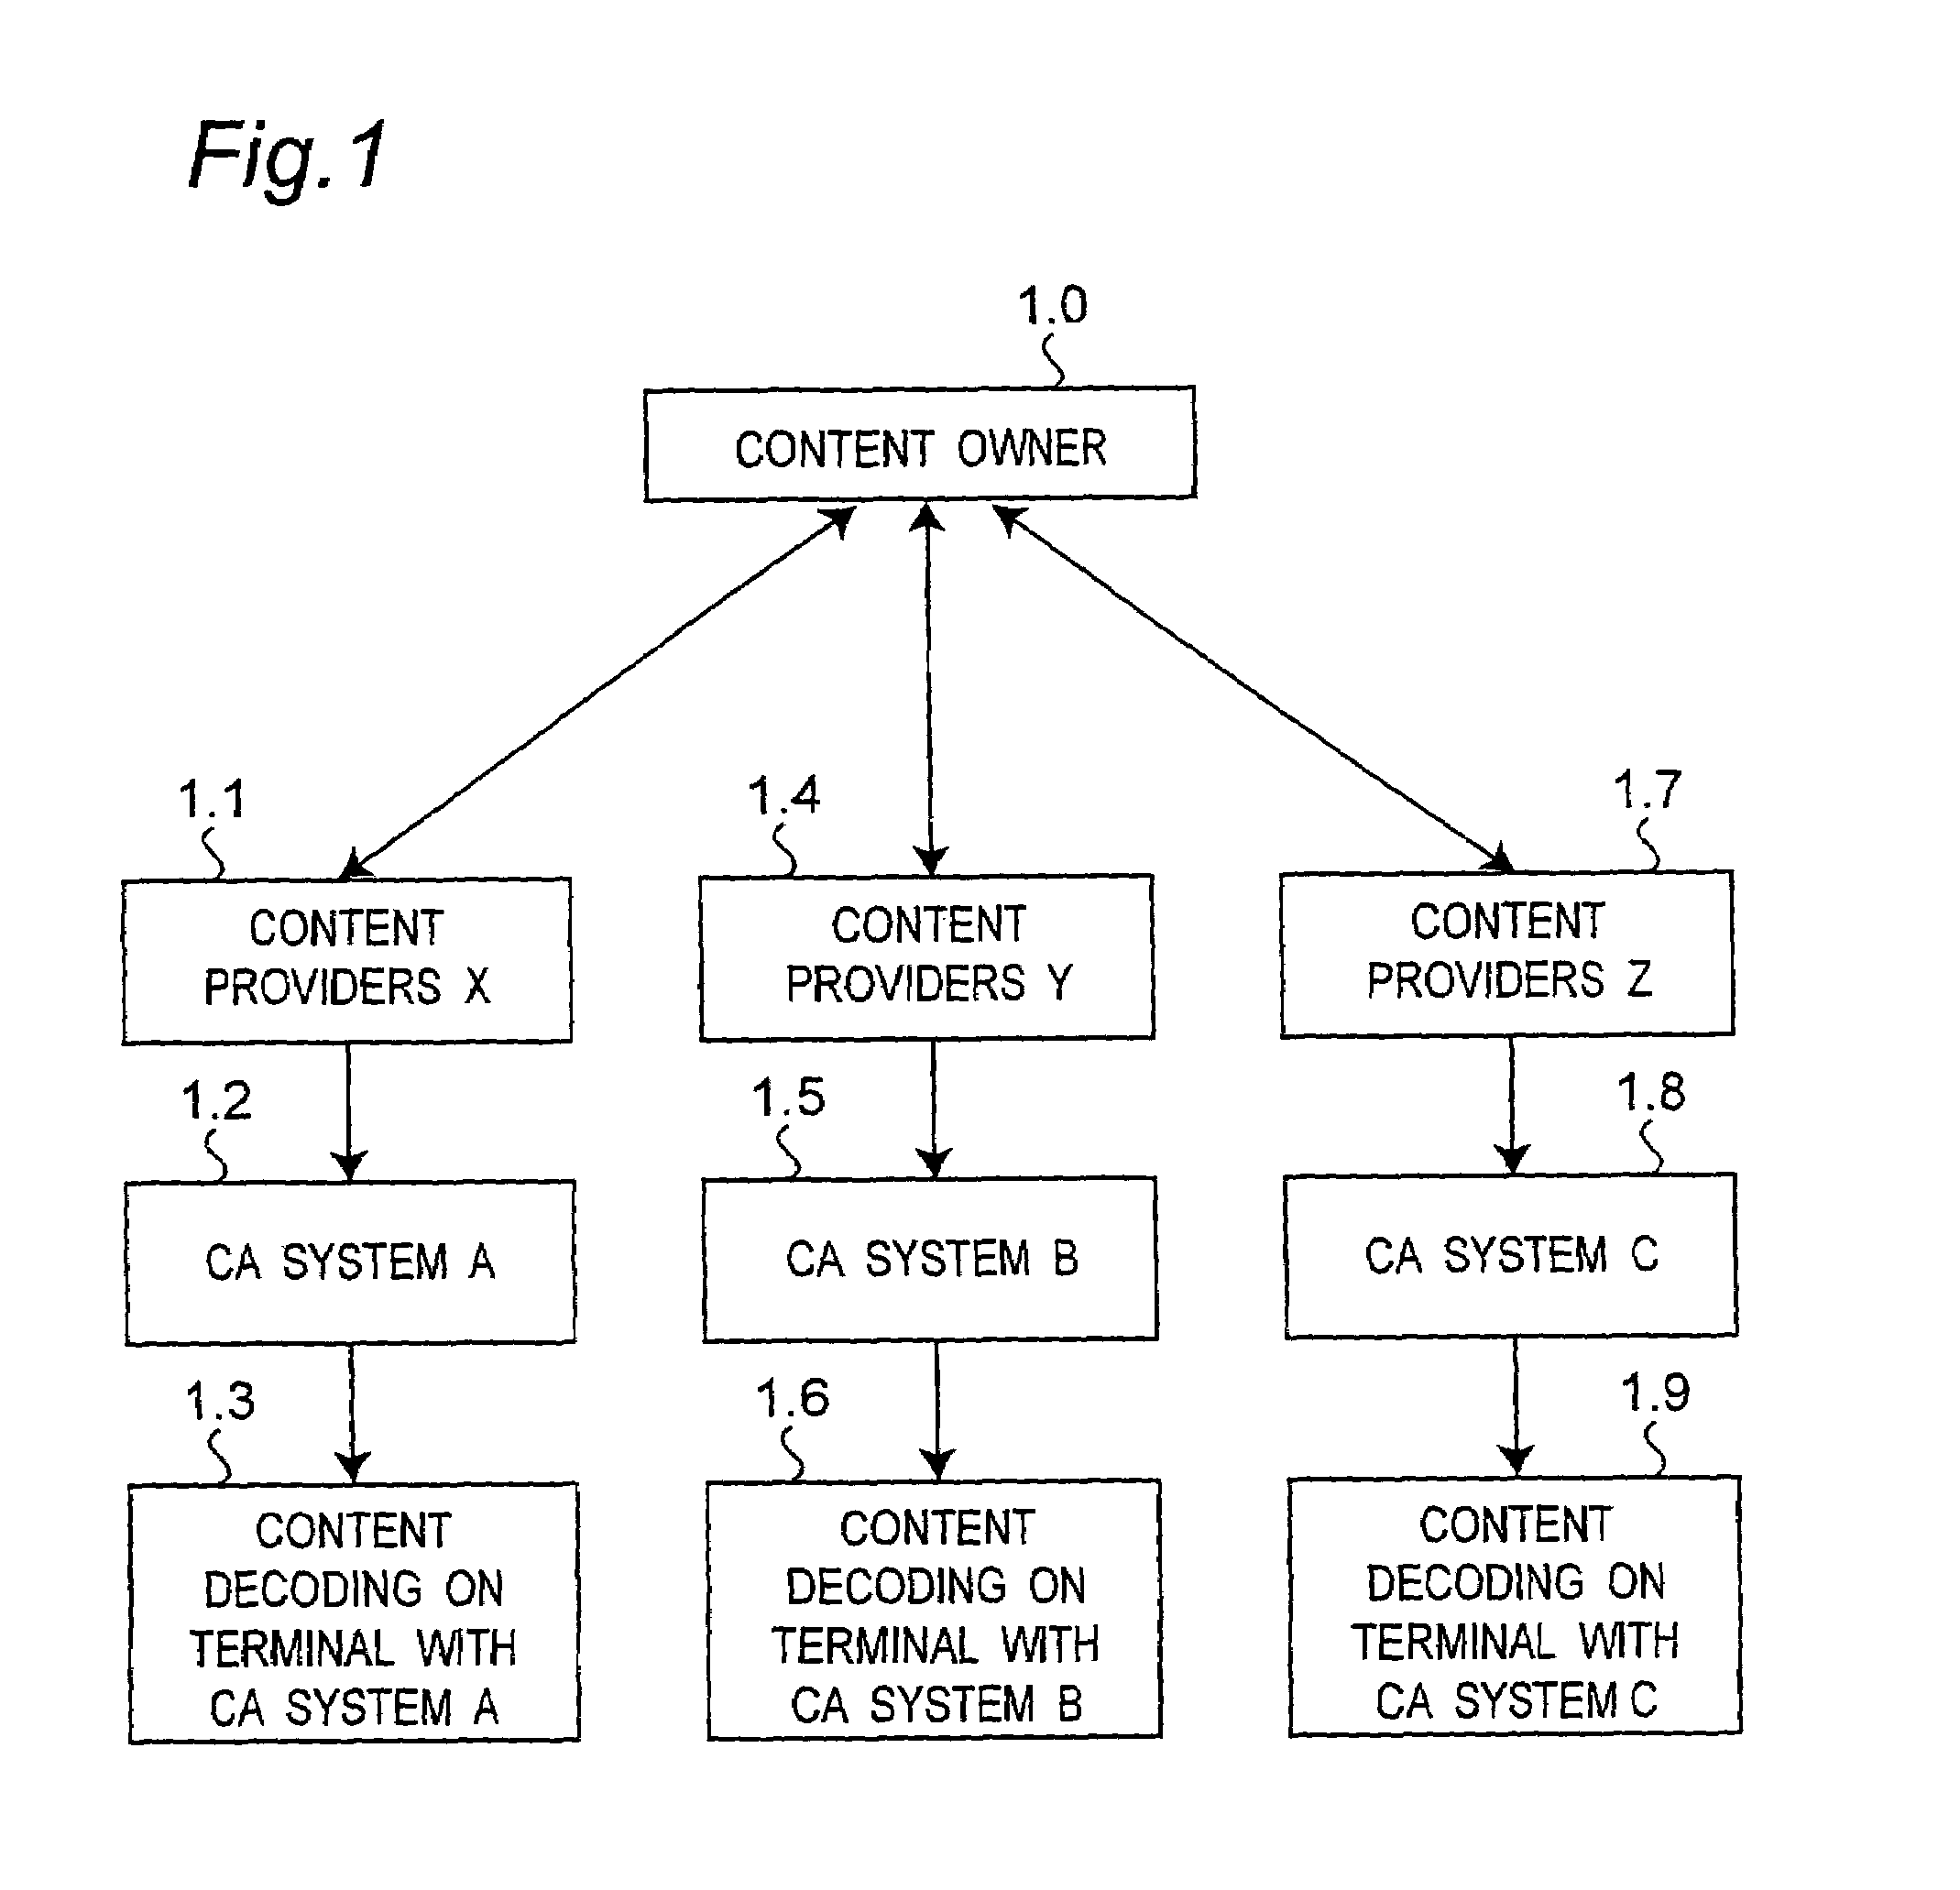 Apparatus of a flexible and common IPMP system for MPEG-2 content distribution and protection